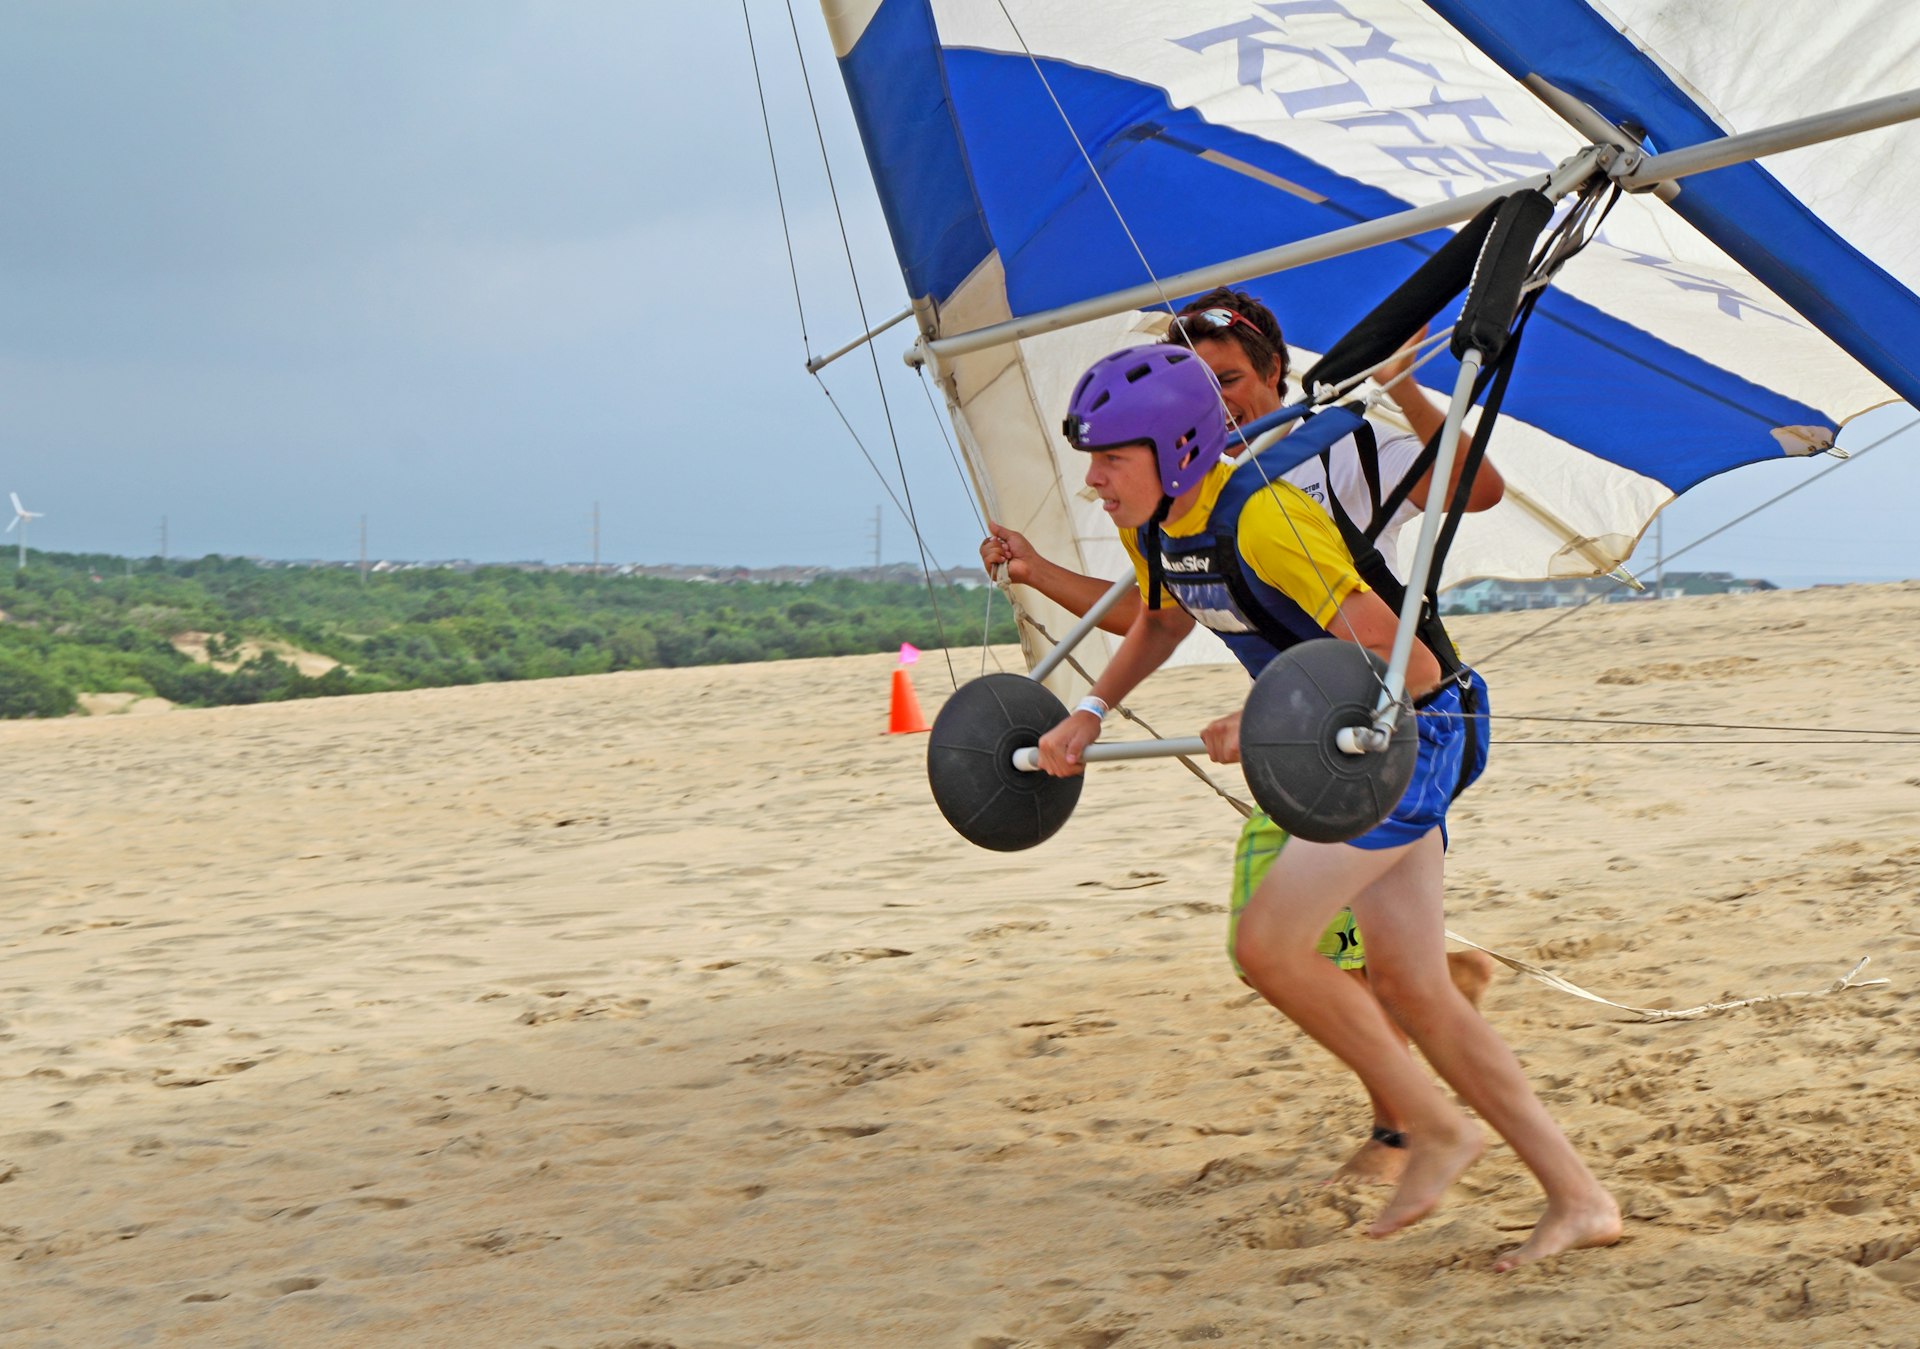 A teen is instructed in hang gliding from a kite on sandy dunes